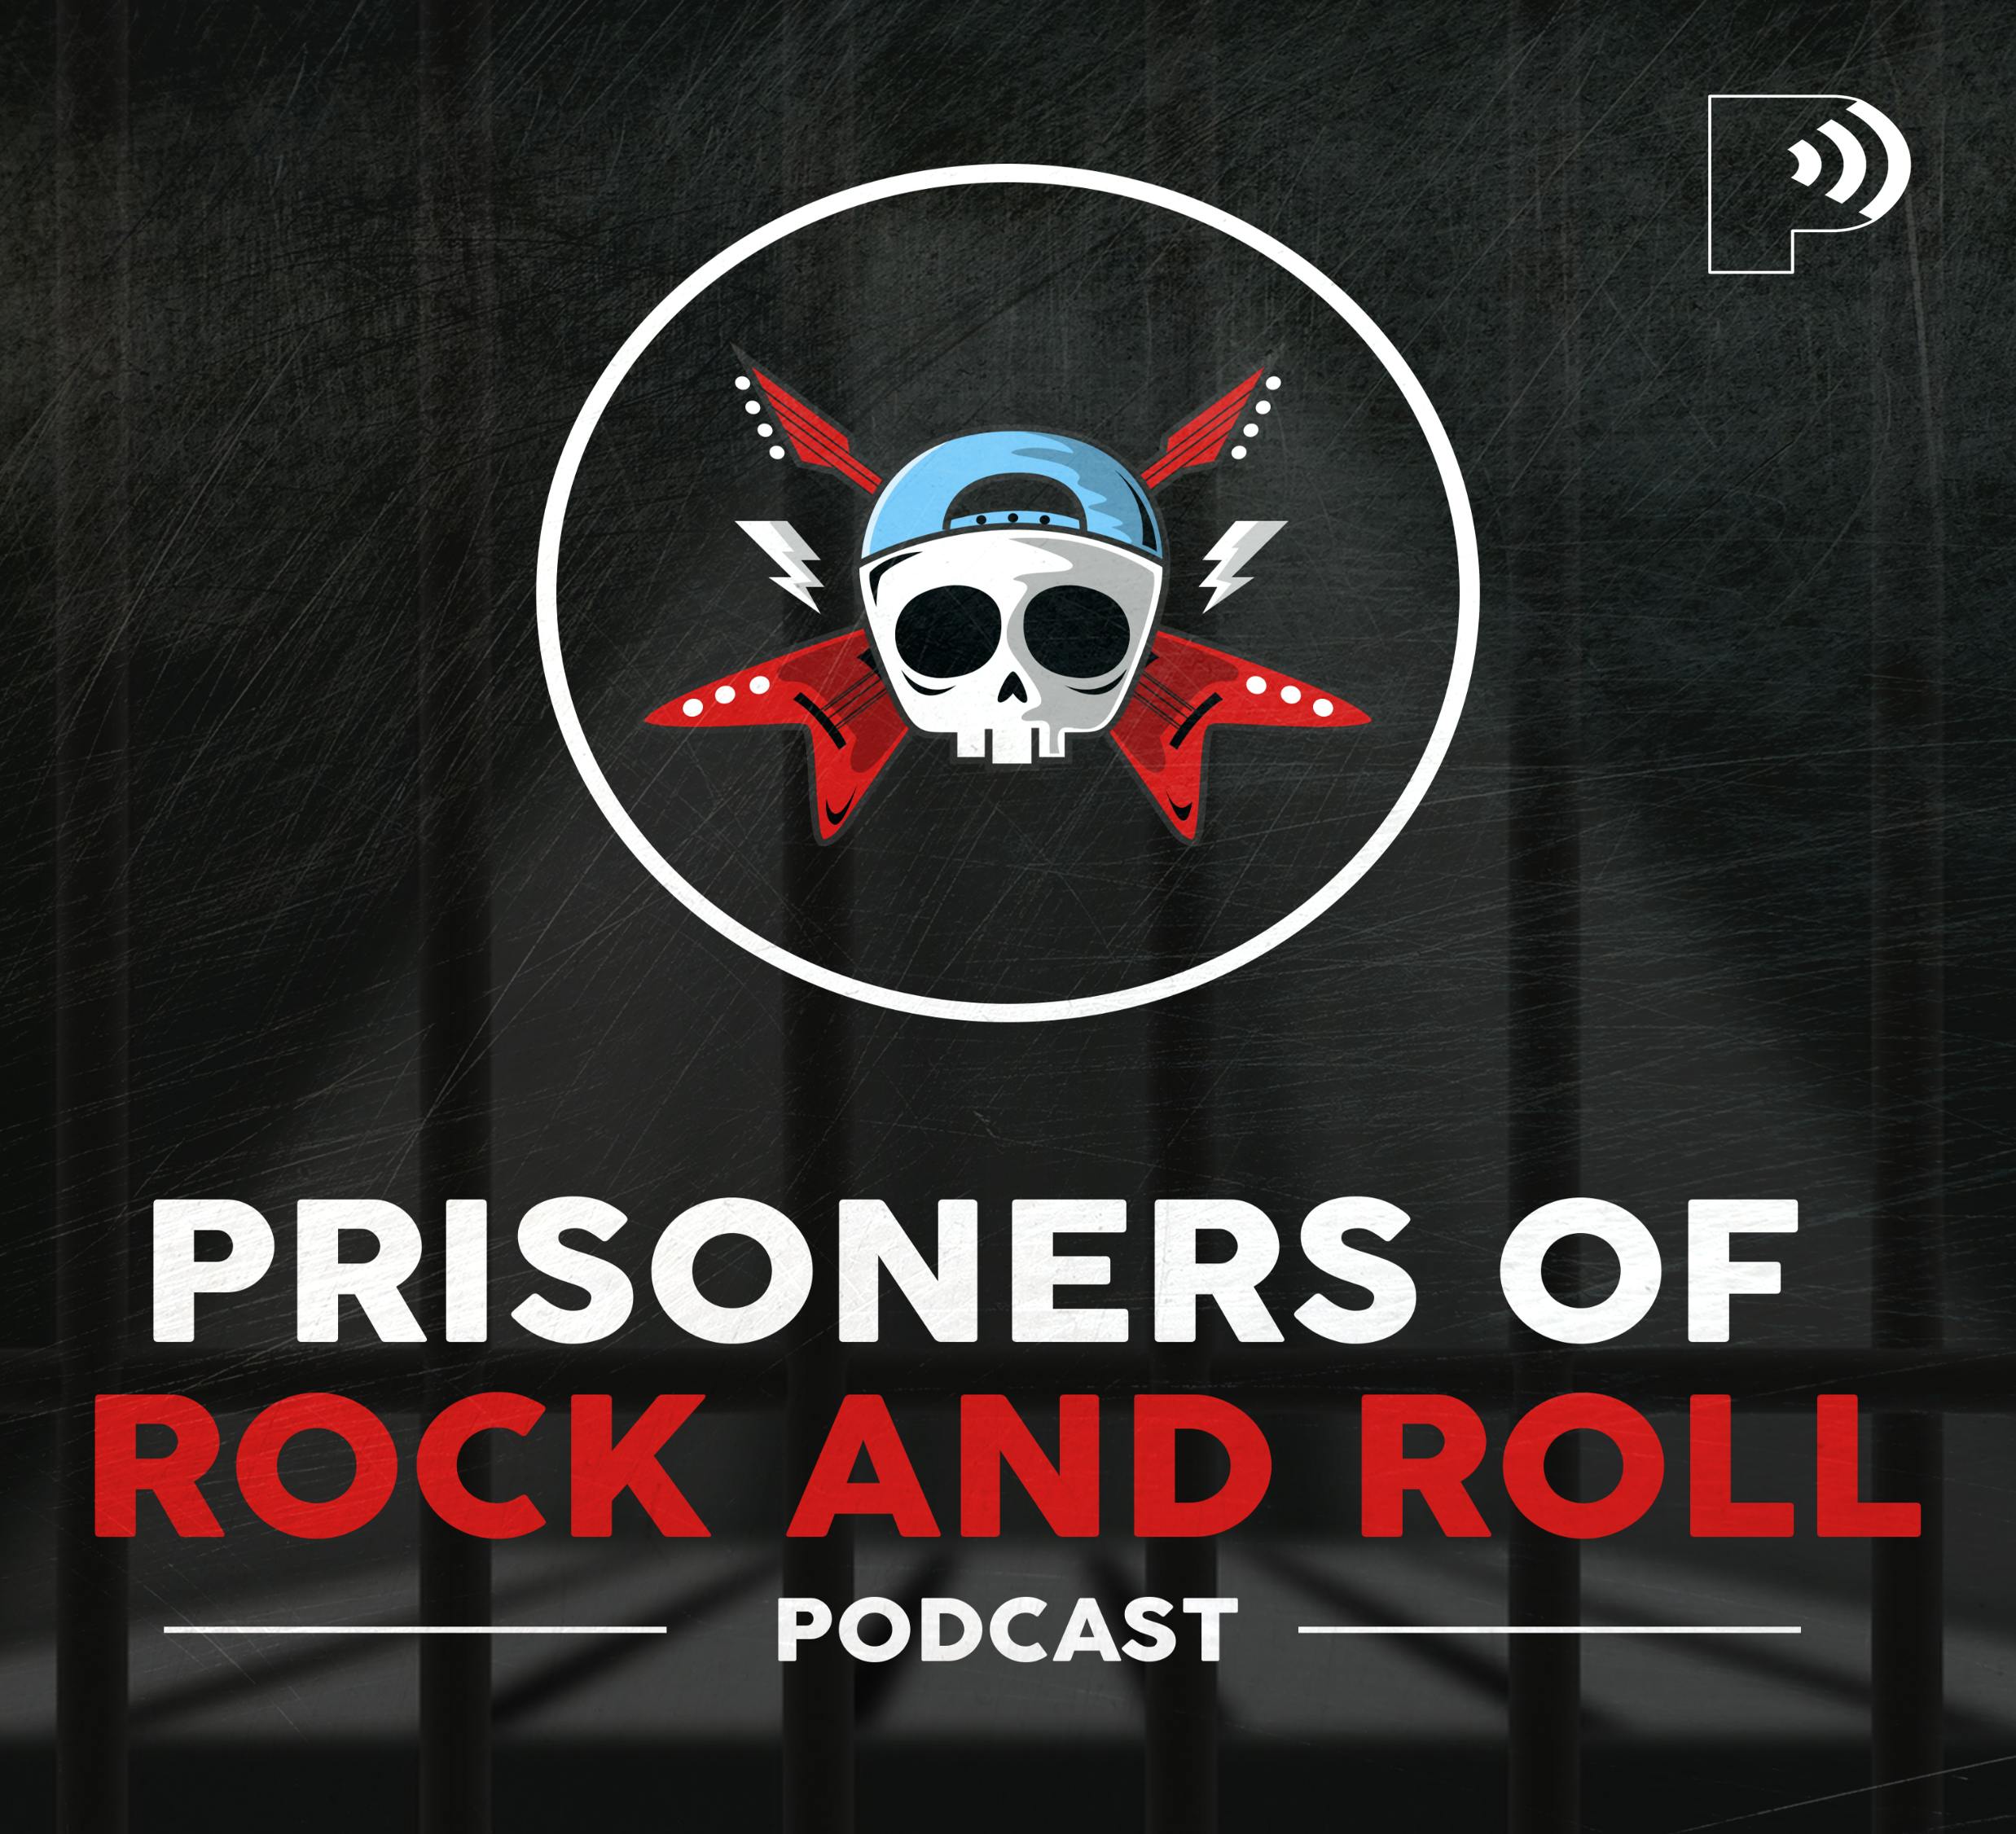 Prisoners of Rock and Roll: Hot Rod Radio! Songs About Cars